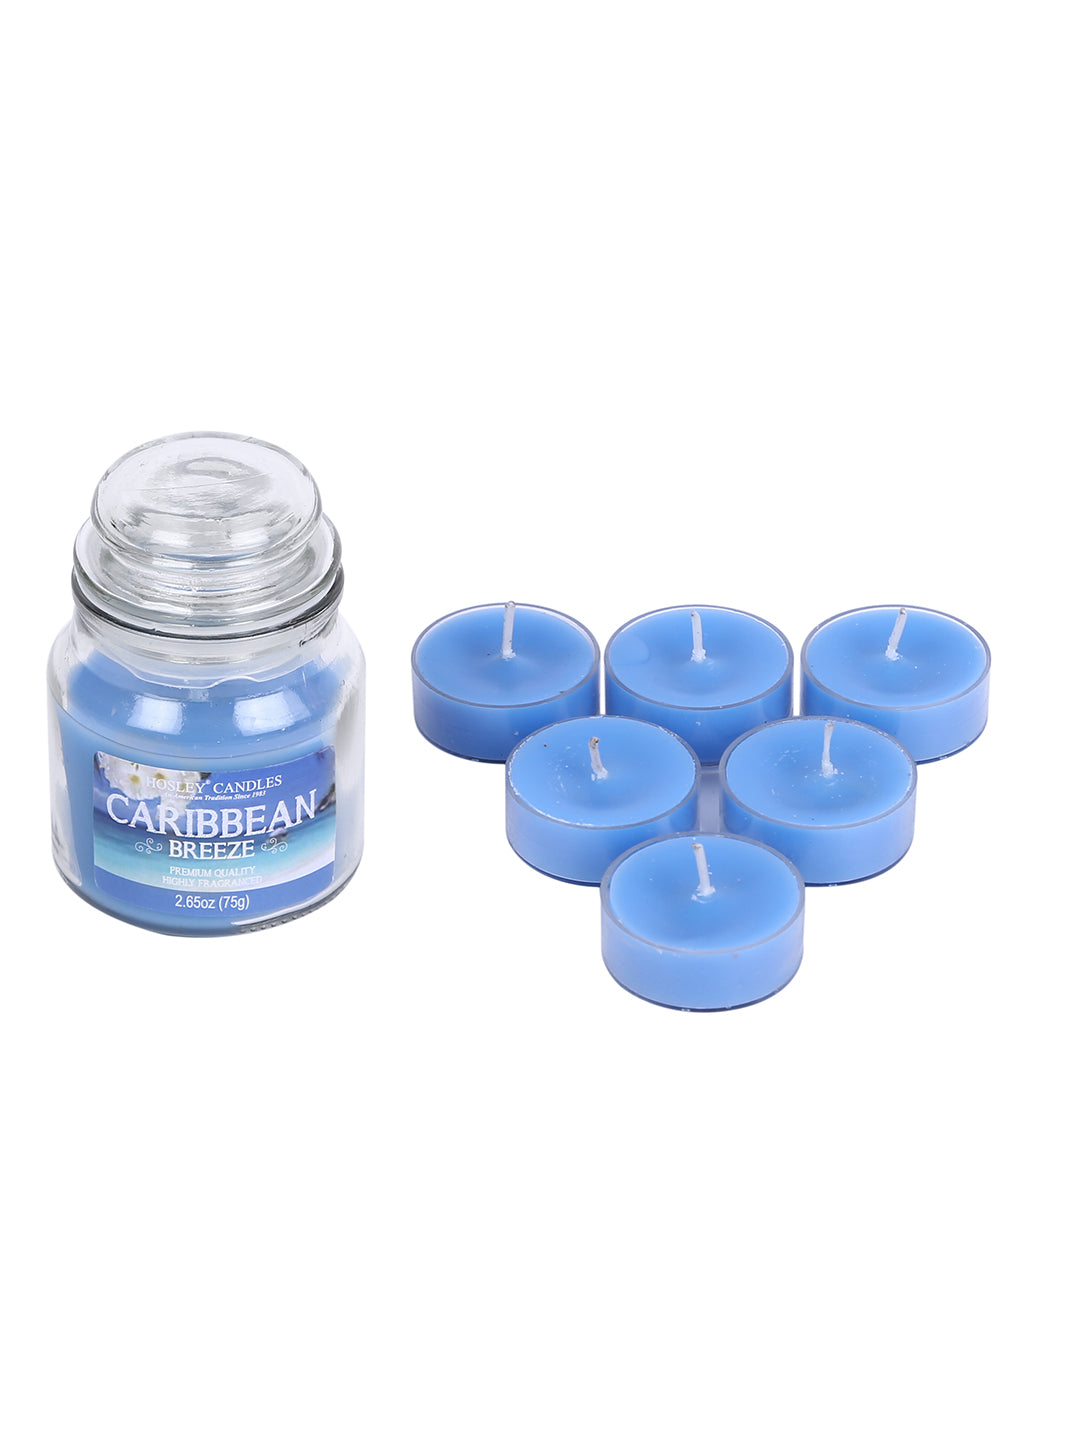 Hosley® Caribbean Breeze Highly Scented, 2.65 Oz wax, Jar Candle with Pack of 6-Pieces Scented Tealights